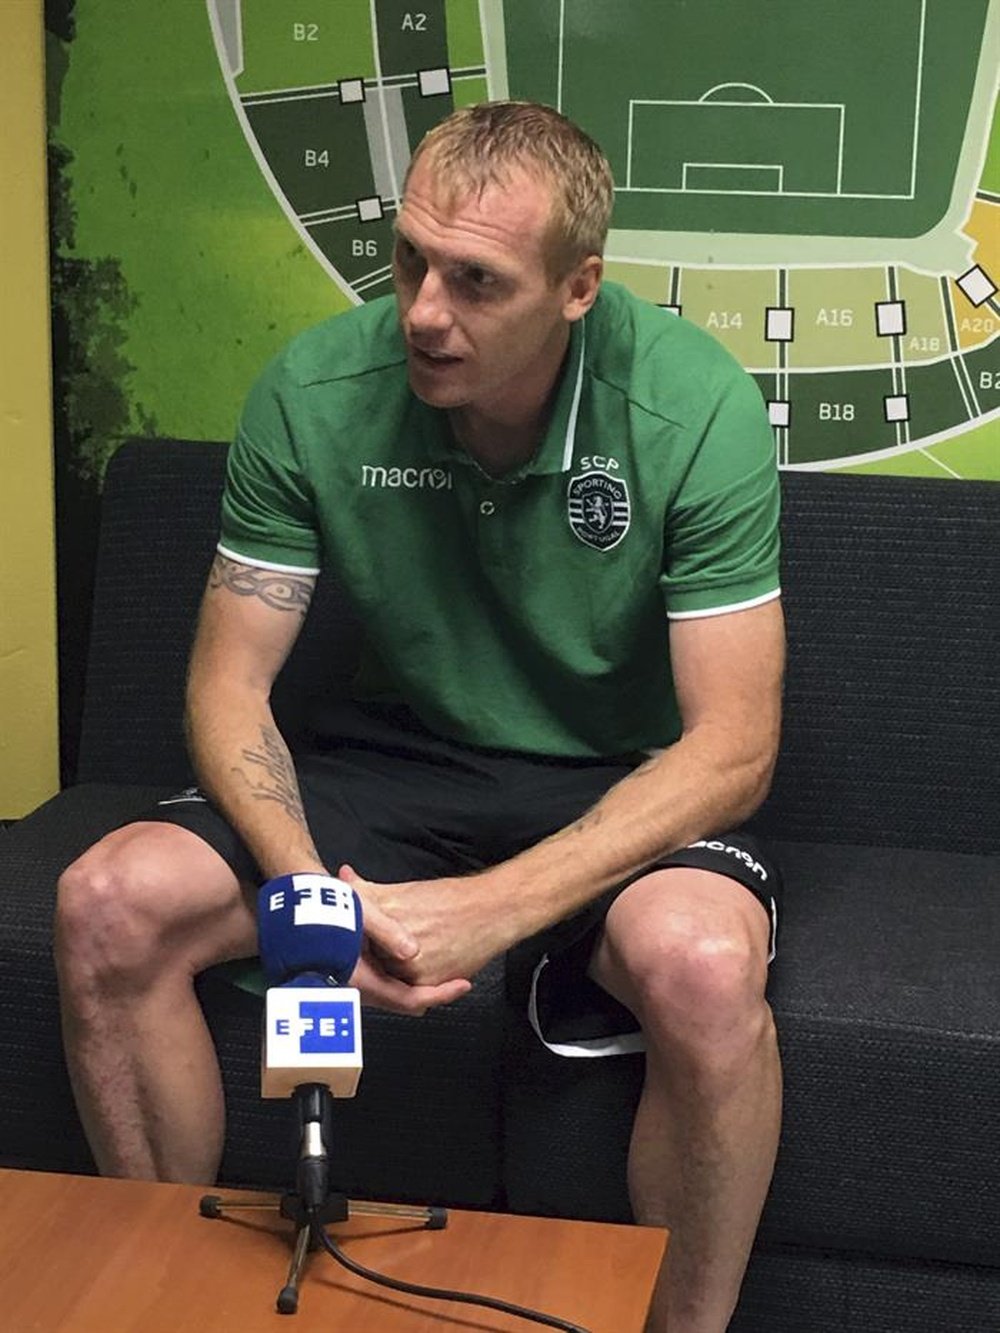 Sporting's Mathieu during an interview. EFE